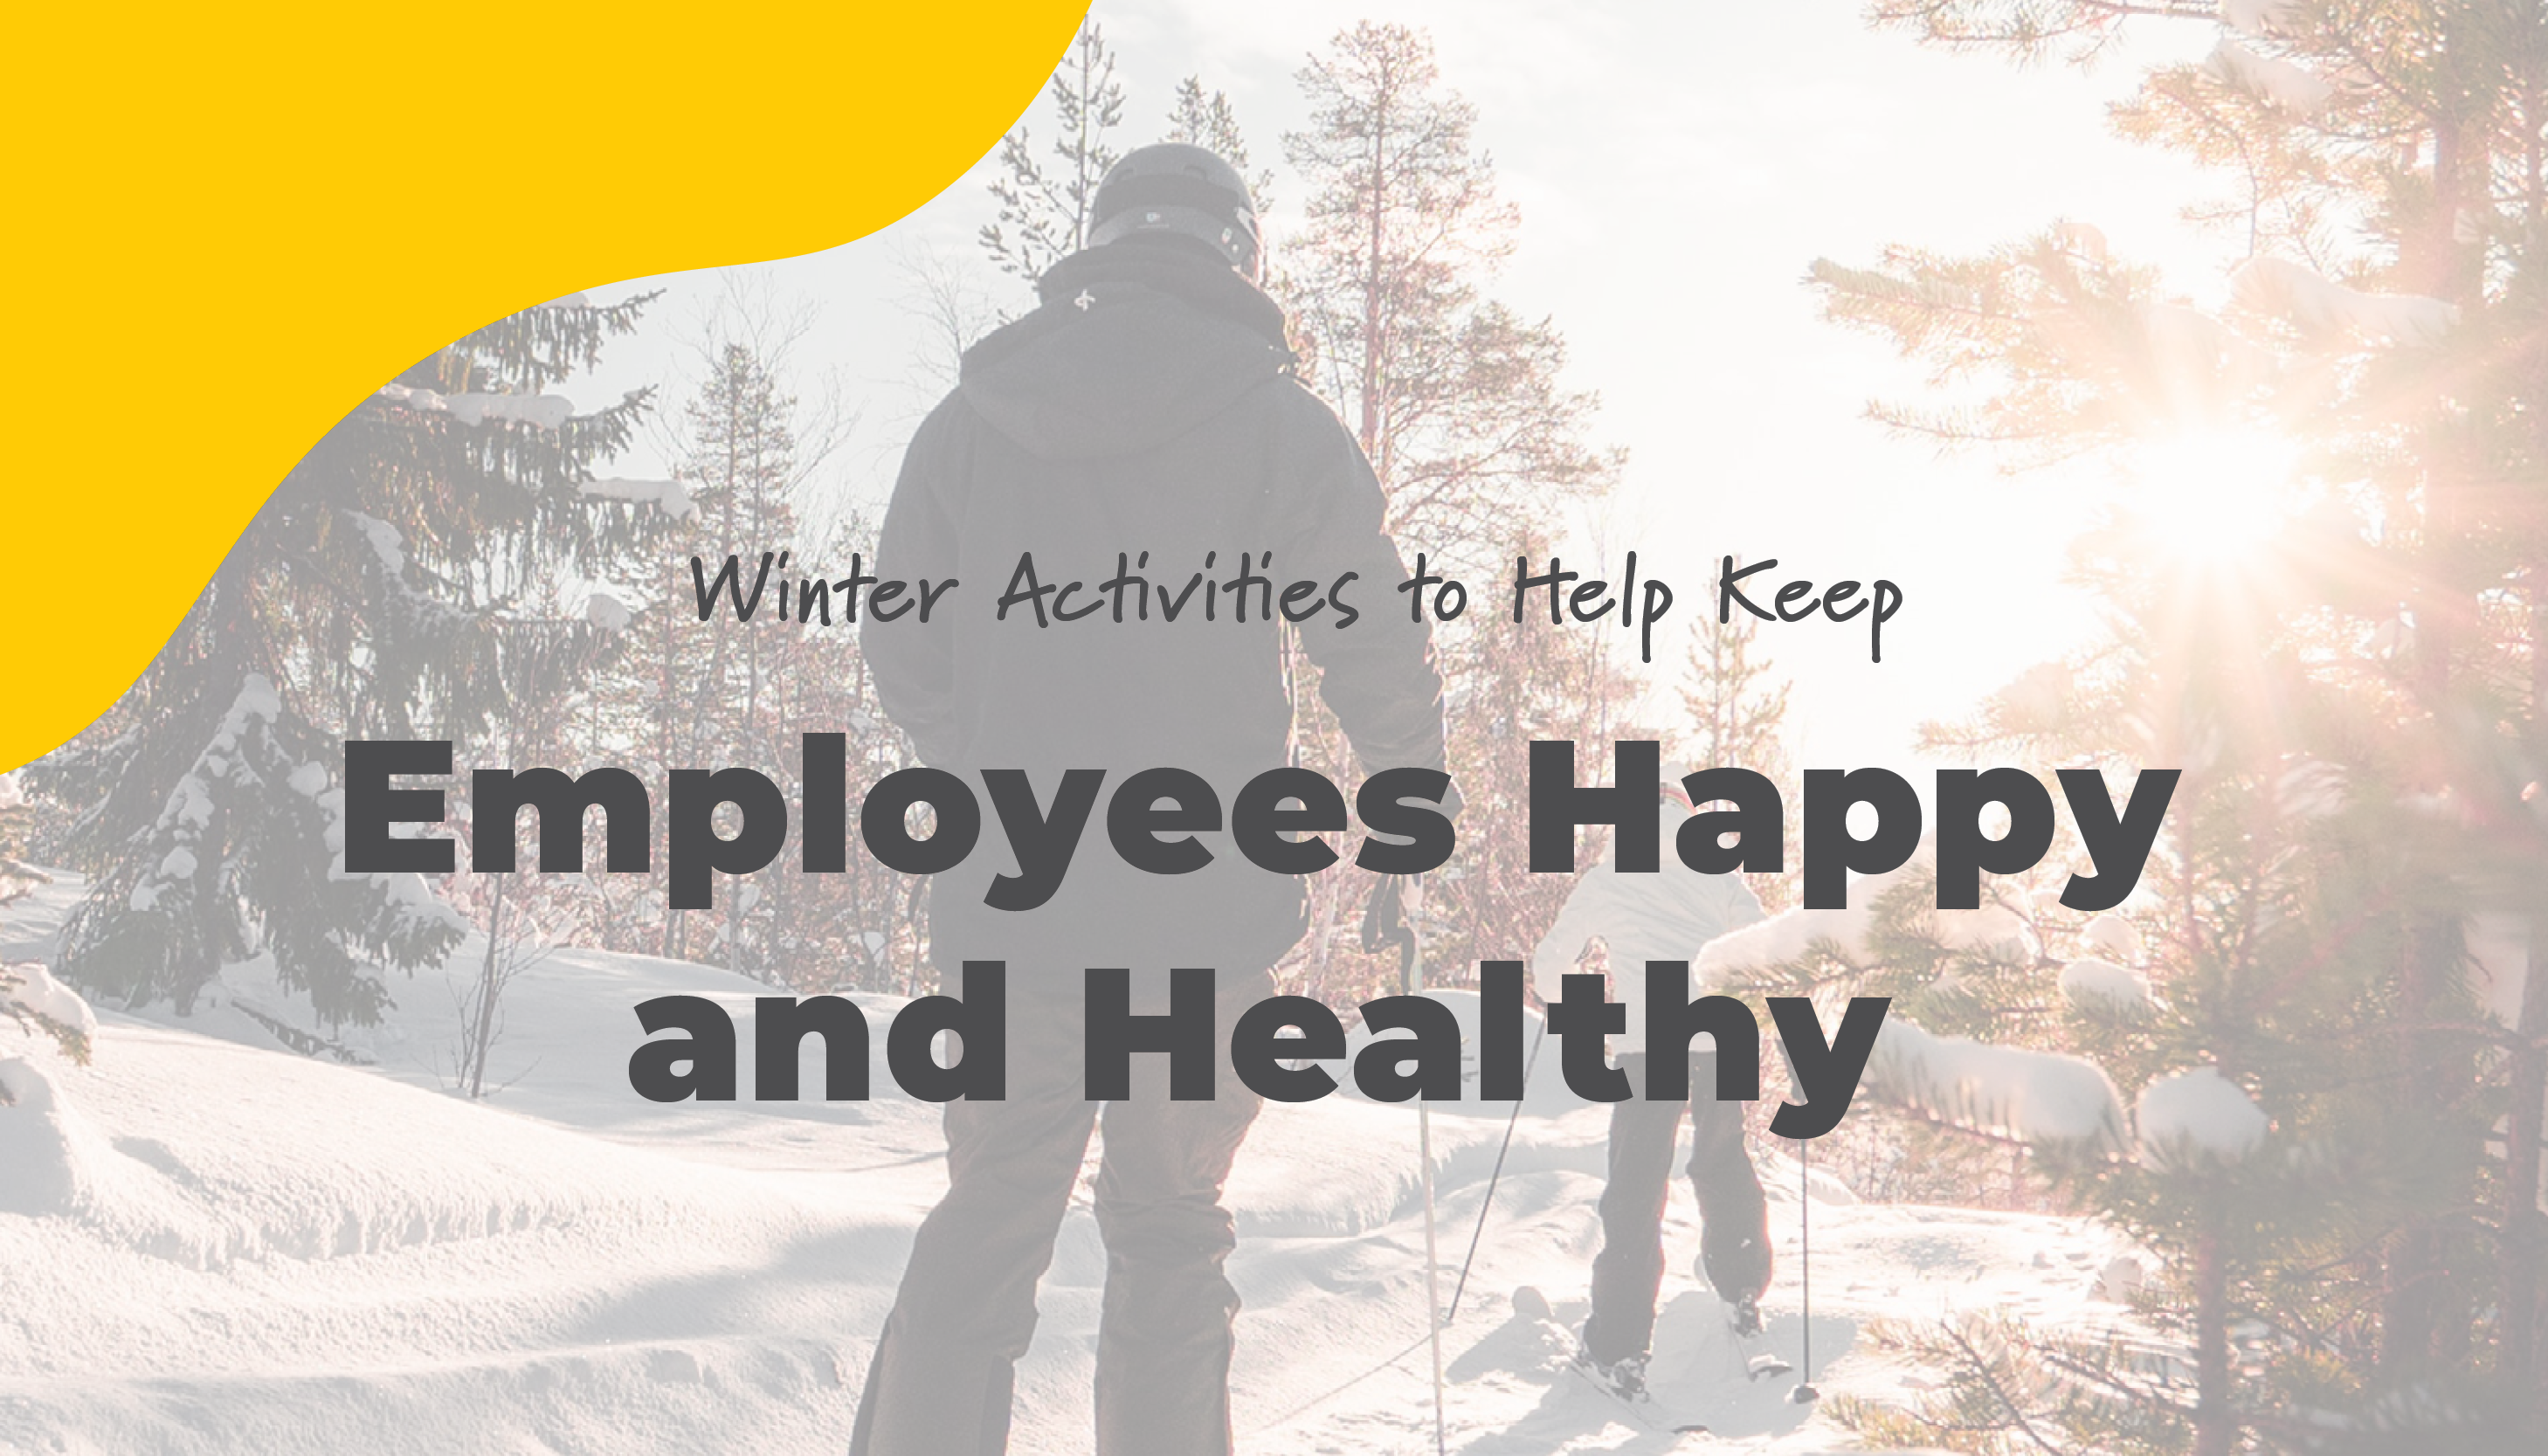 Winter Activities to Help Keep Employees Happy and Healthy